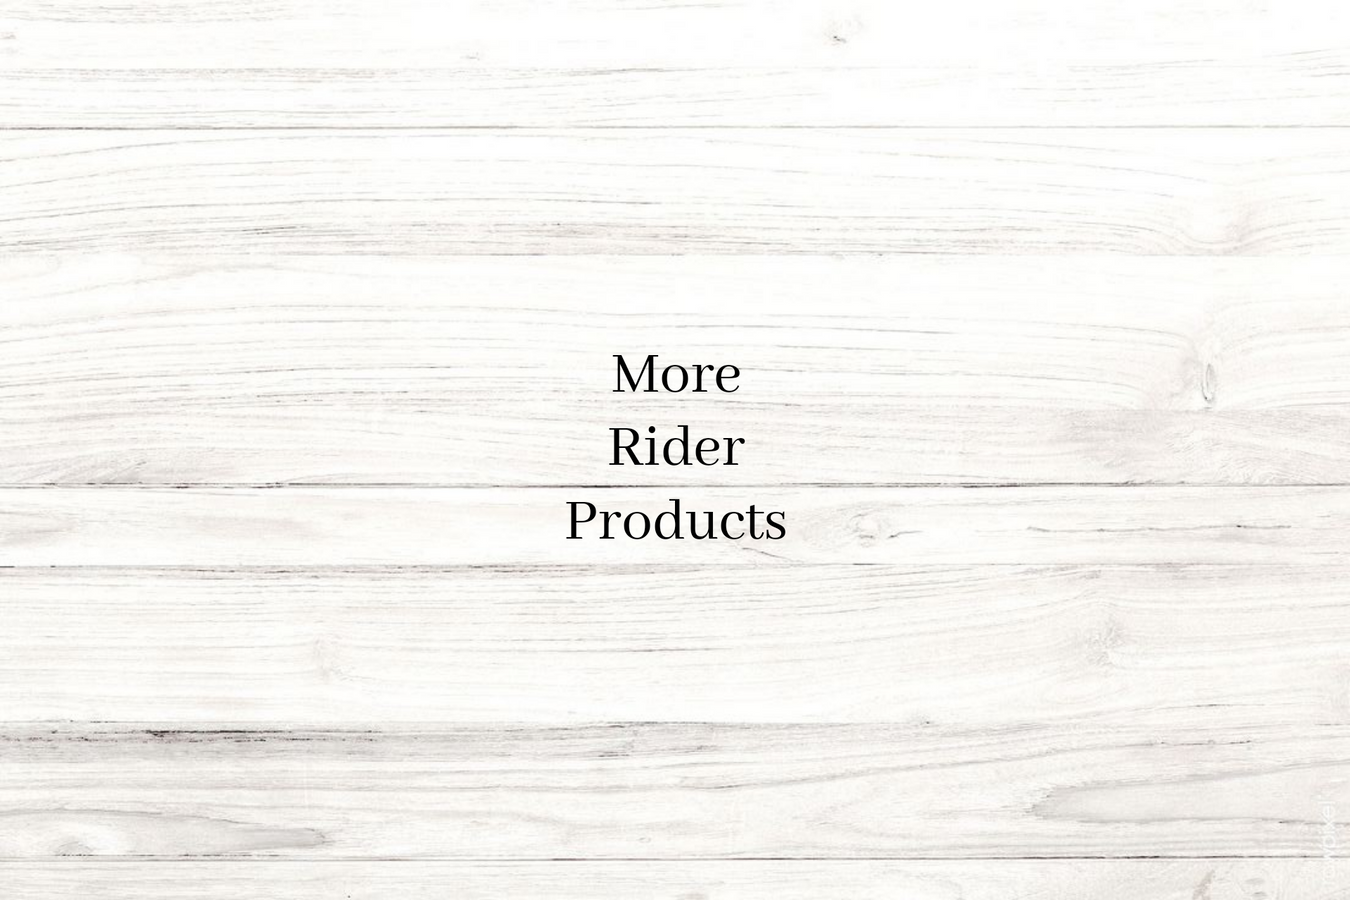 Rider Products